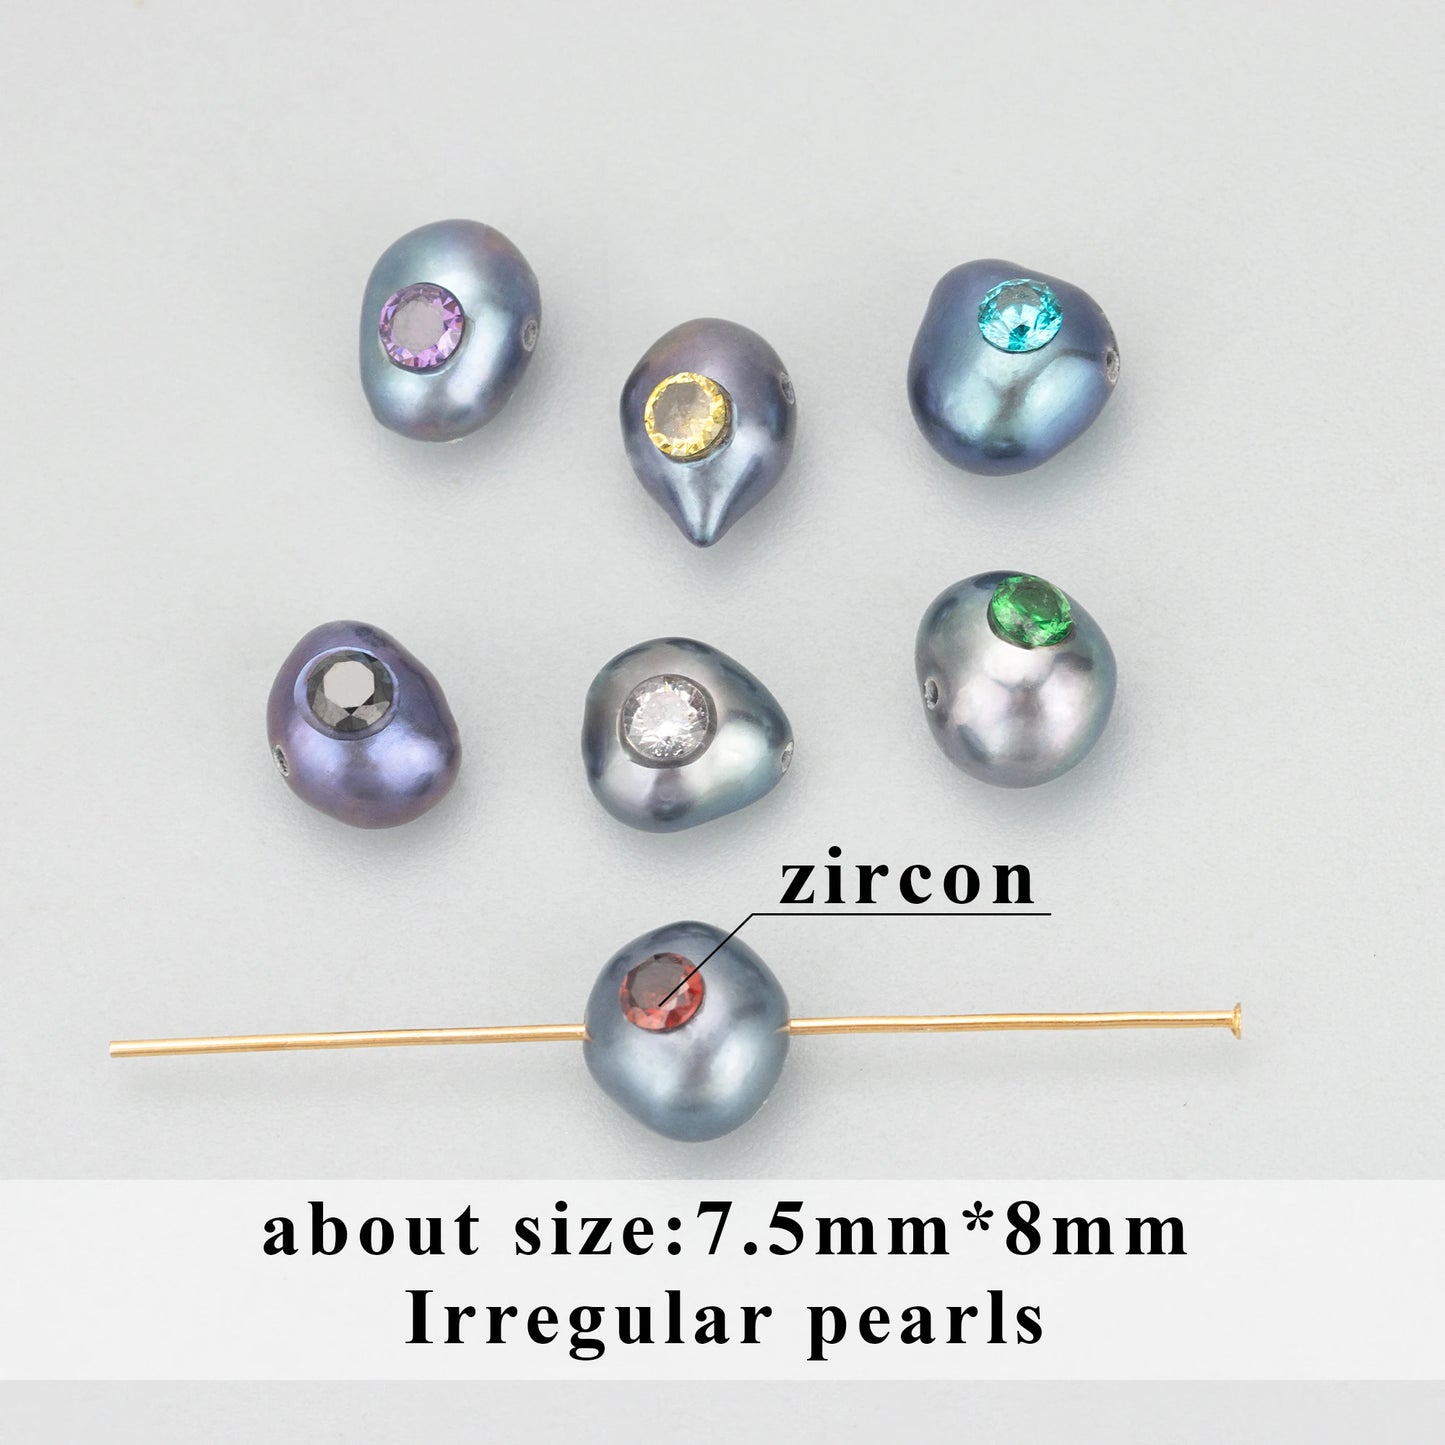 GUFEATHER MD96,natural pearl,jewelry accessories,pearl with zircons,hand made,charms,jewelry making,diy pendants,6pcs/lot